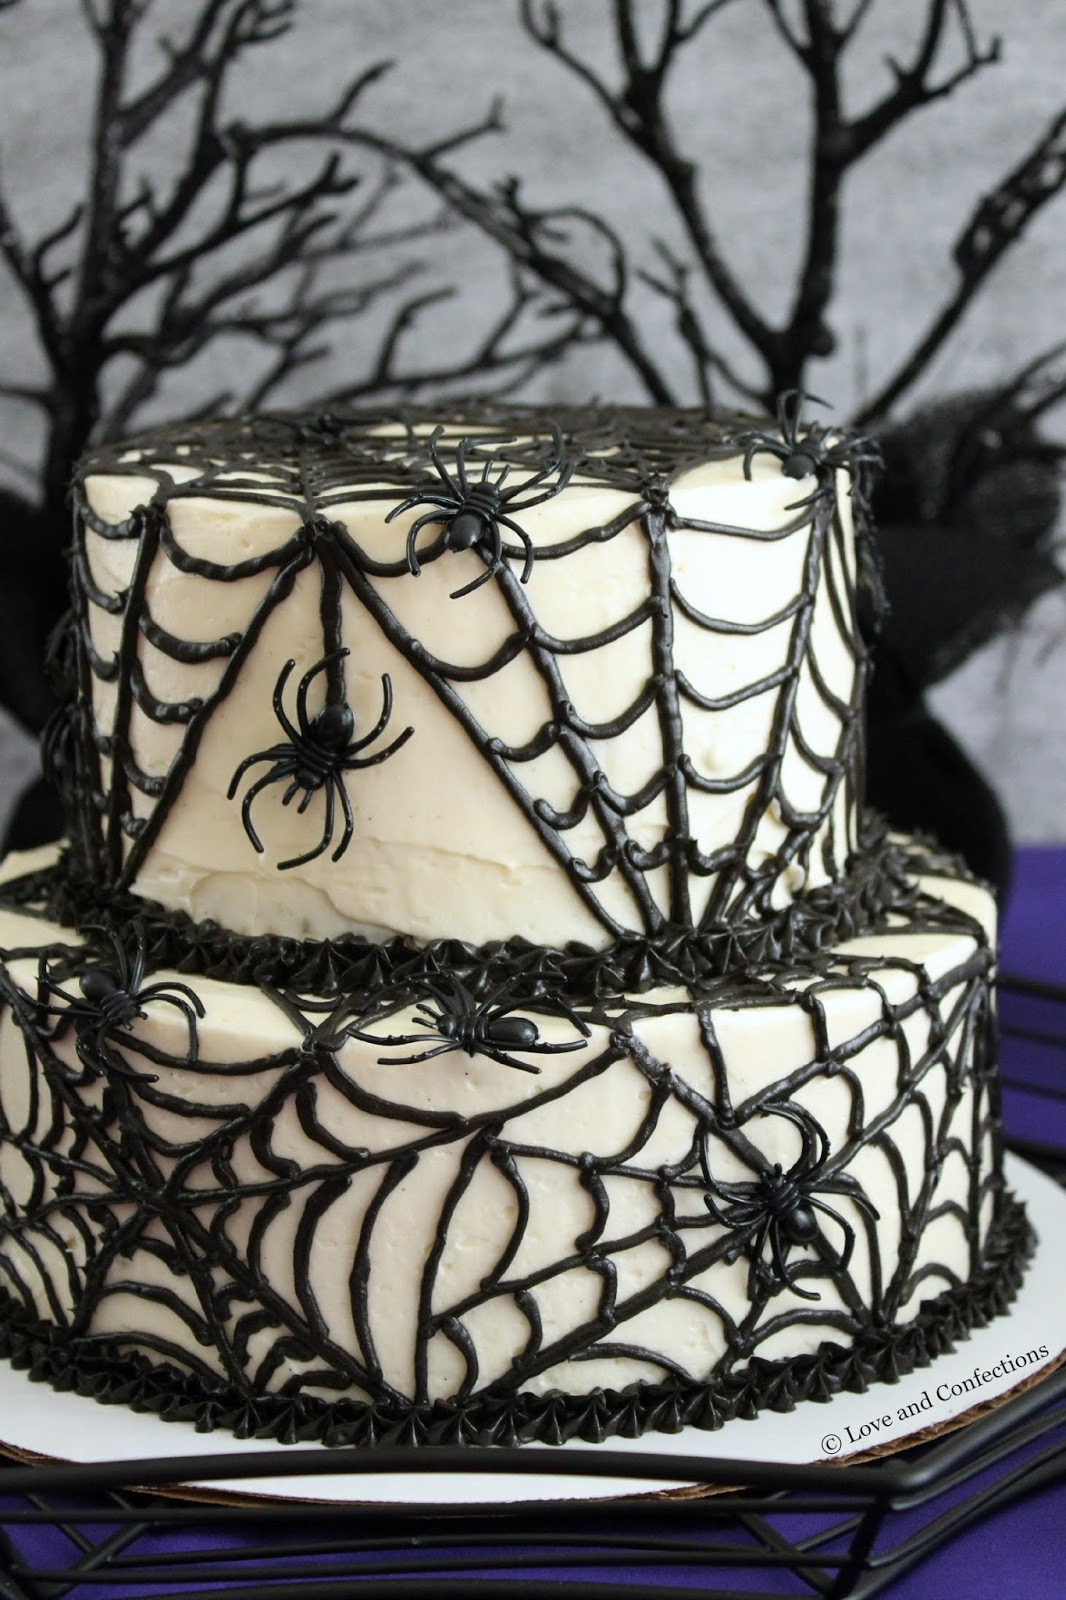 Halloween Spider Cakes
 Love and Confections Black Velvet Spider Cake